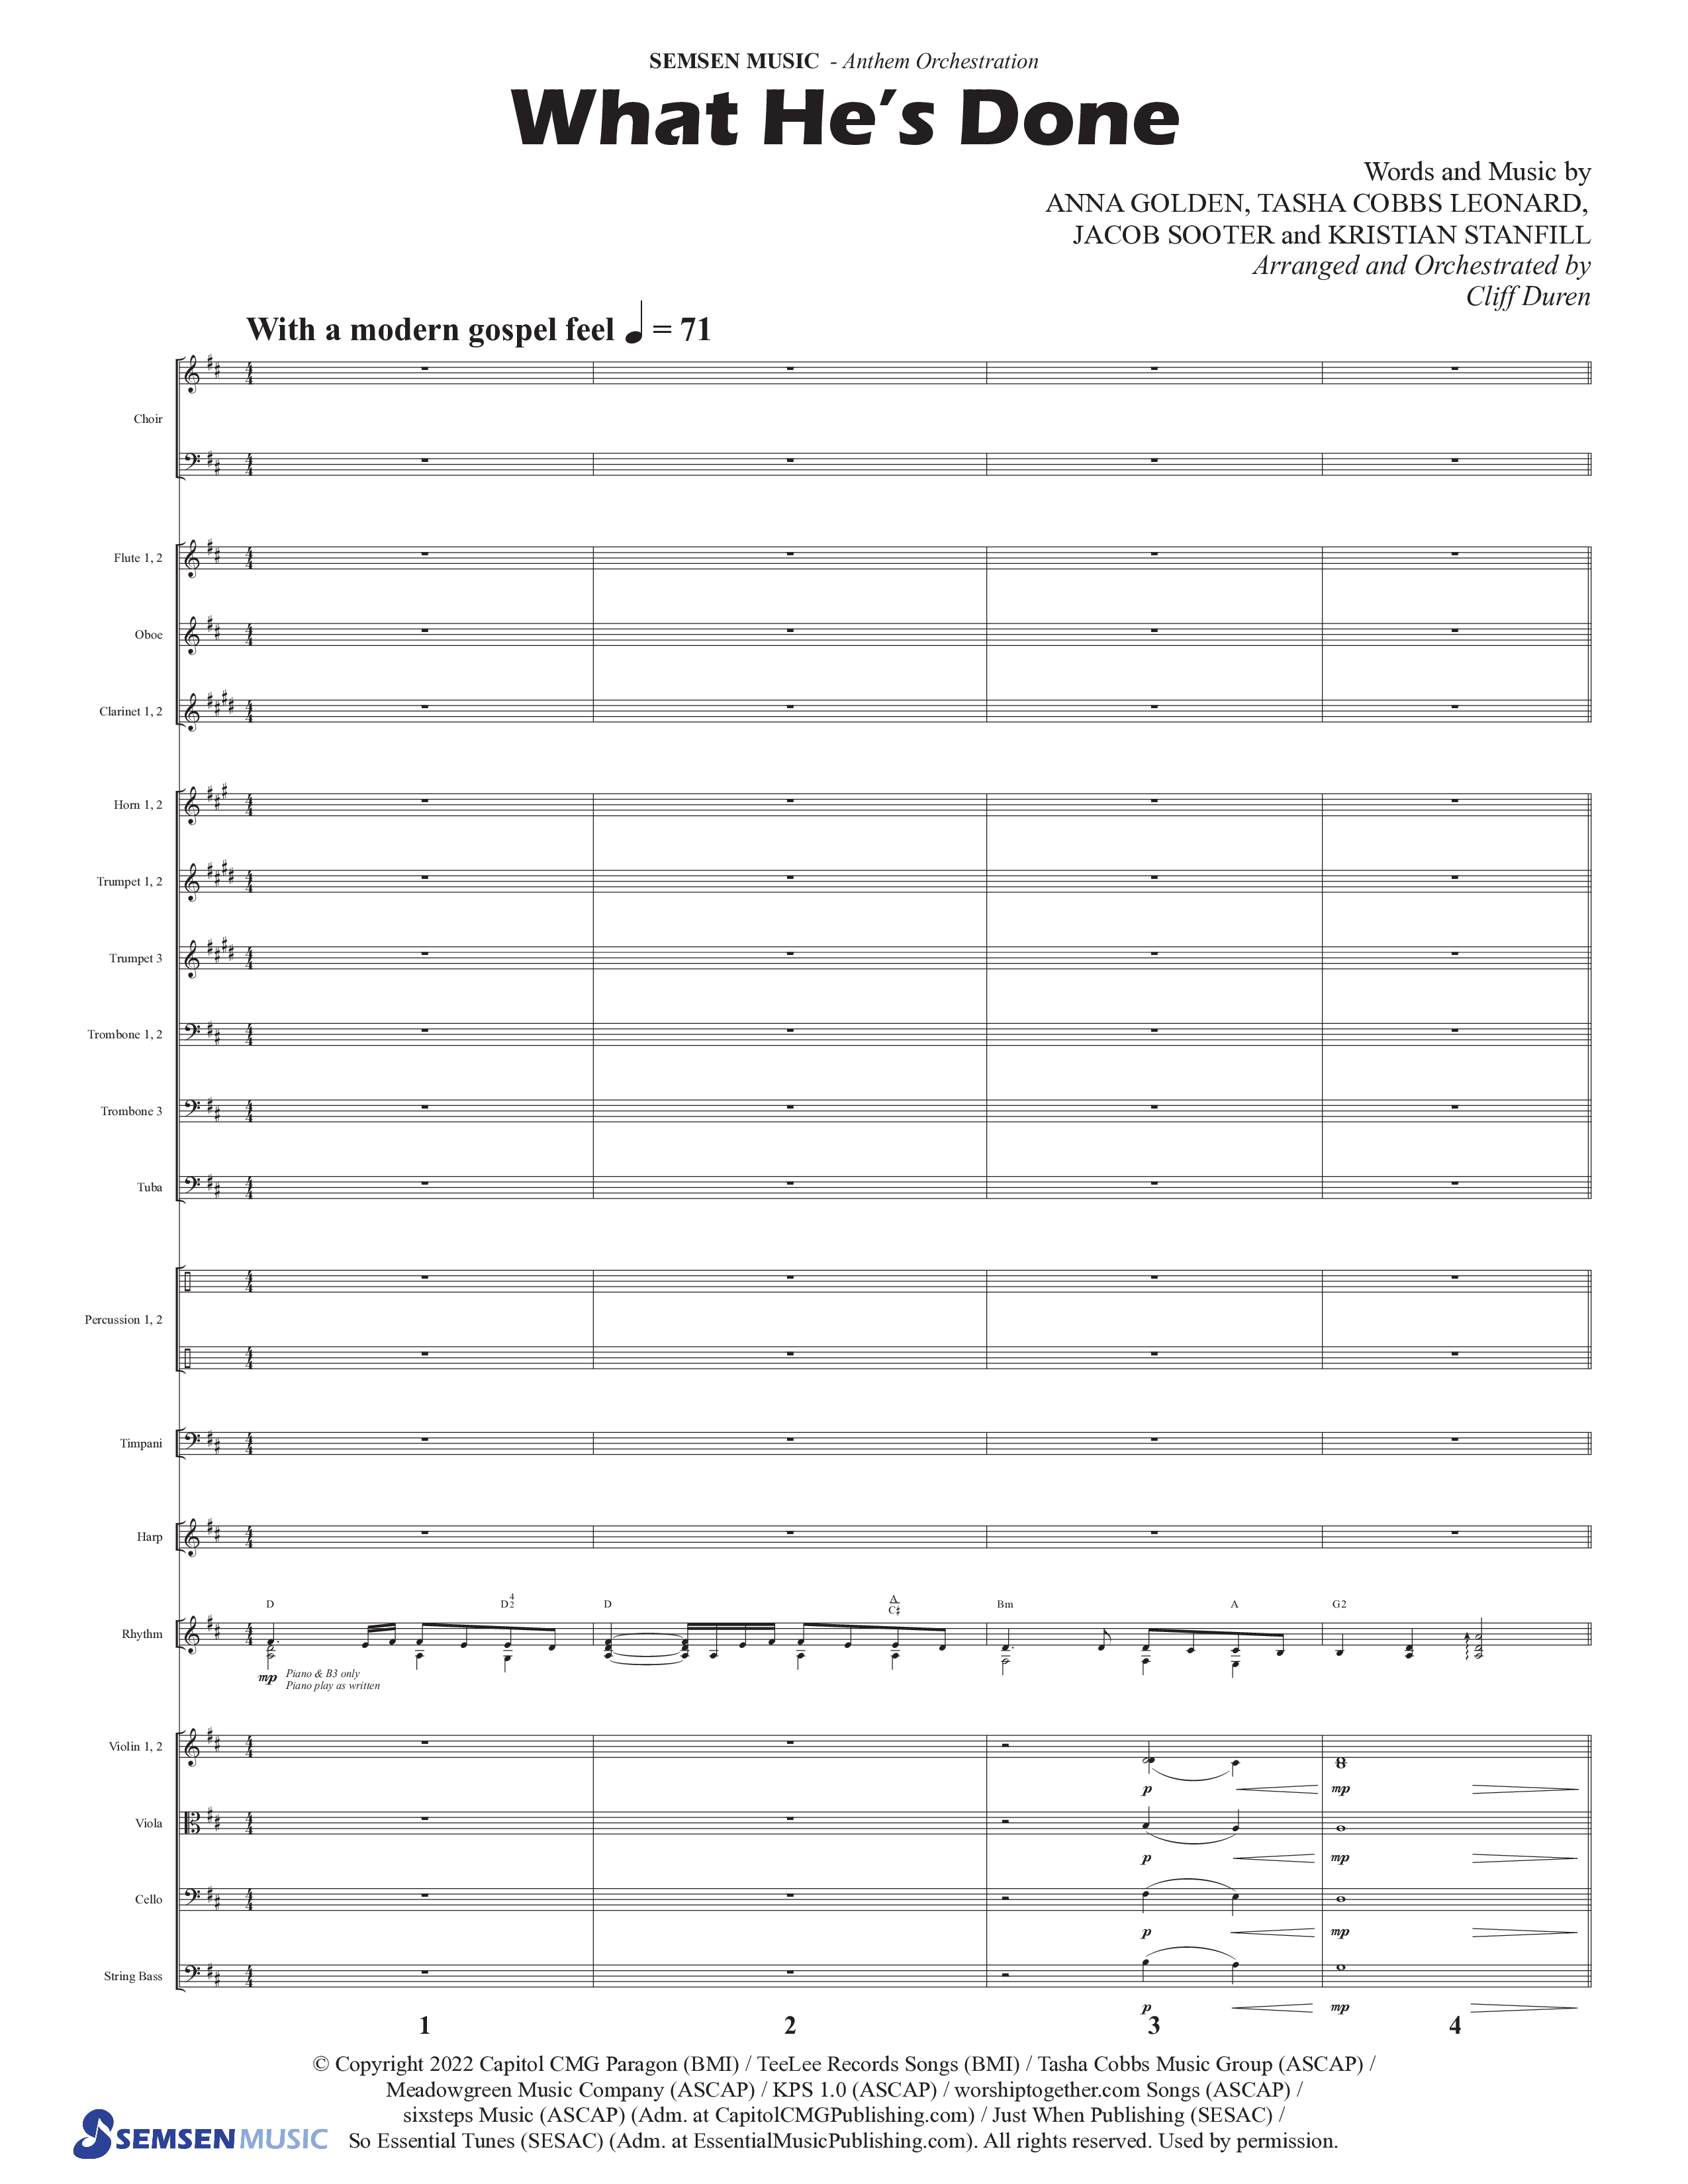 What He's Done (Choral Anthem SATB) Conductor's Score (Semsen Music / Arr. Cliff Duren)